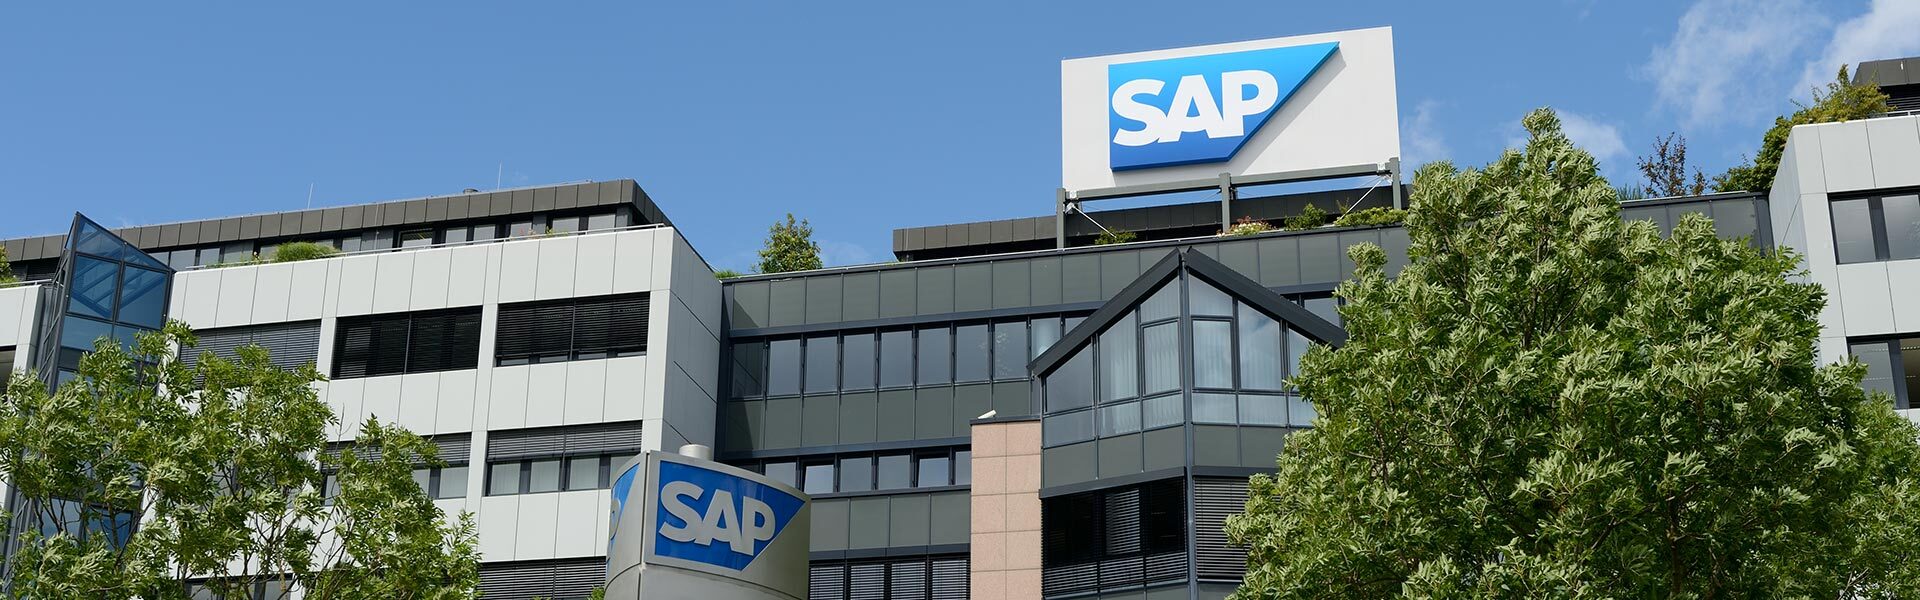 SAP Launches Inaugural SAP Best Run Awards for Southeast Asia to Recognize Achievements of Customers